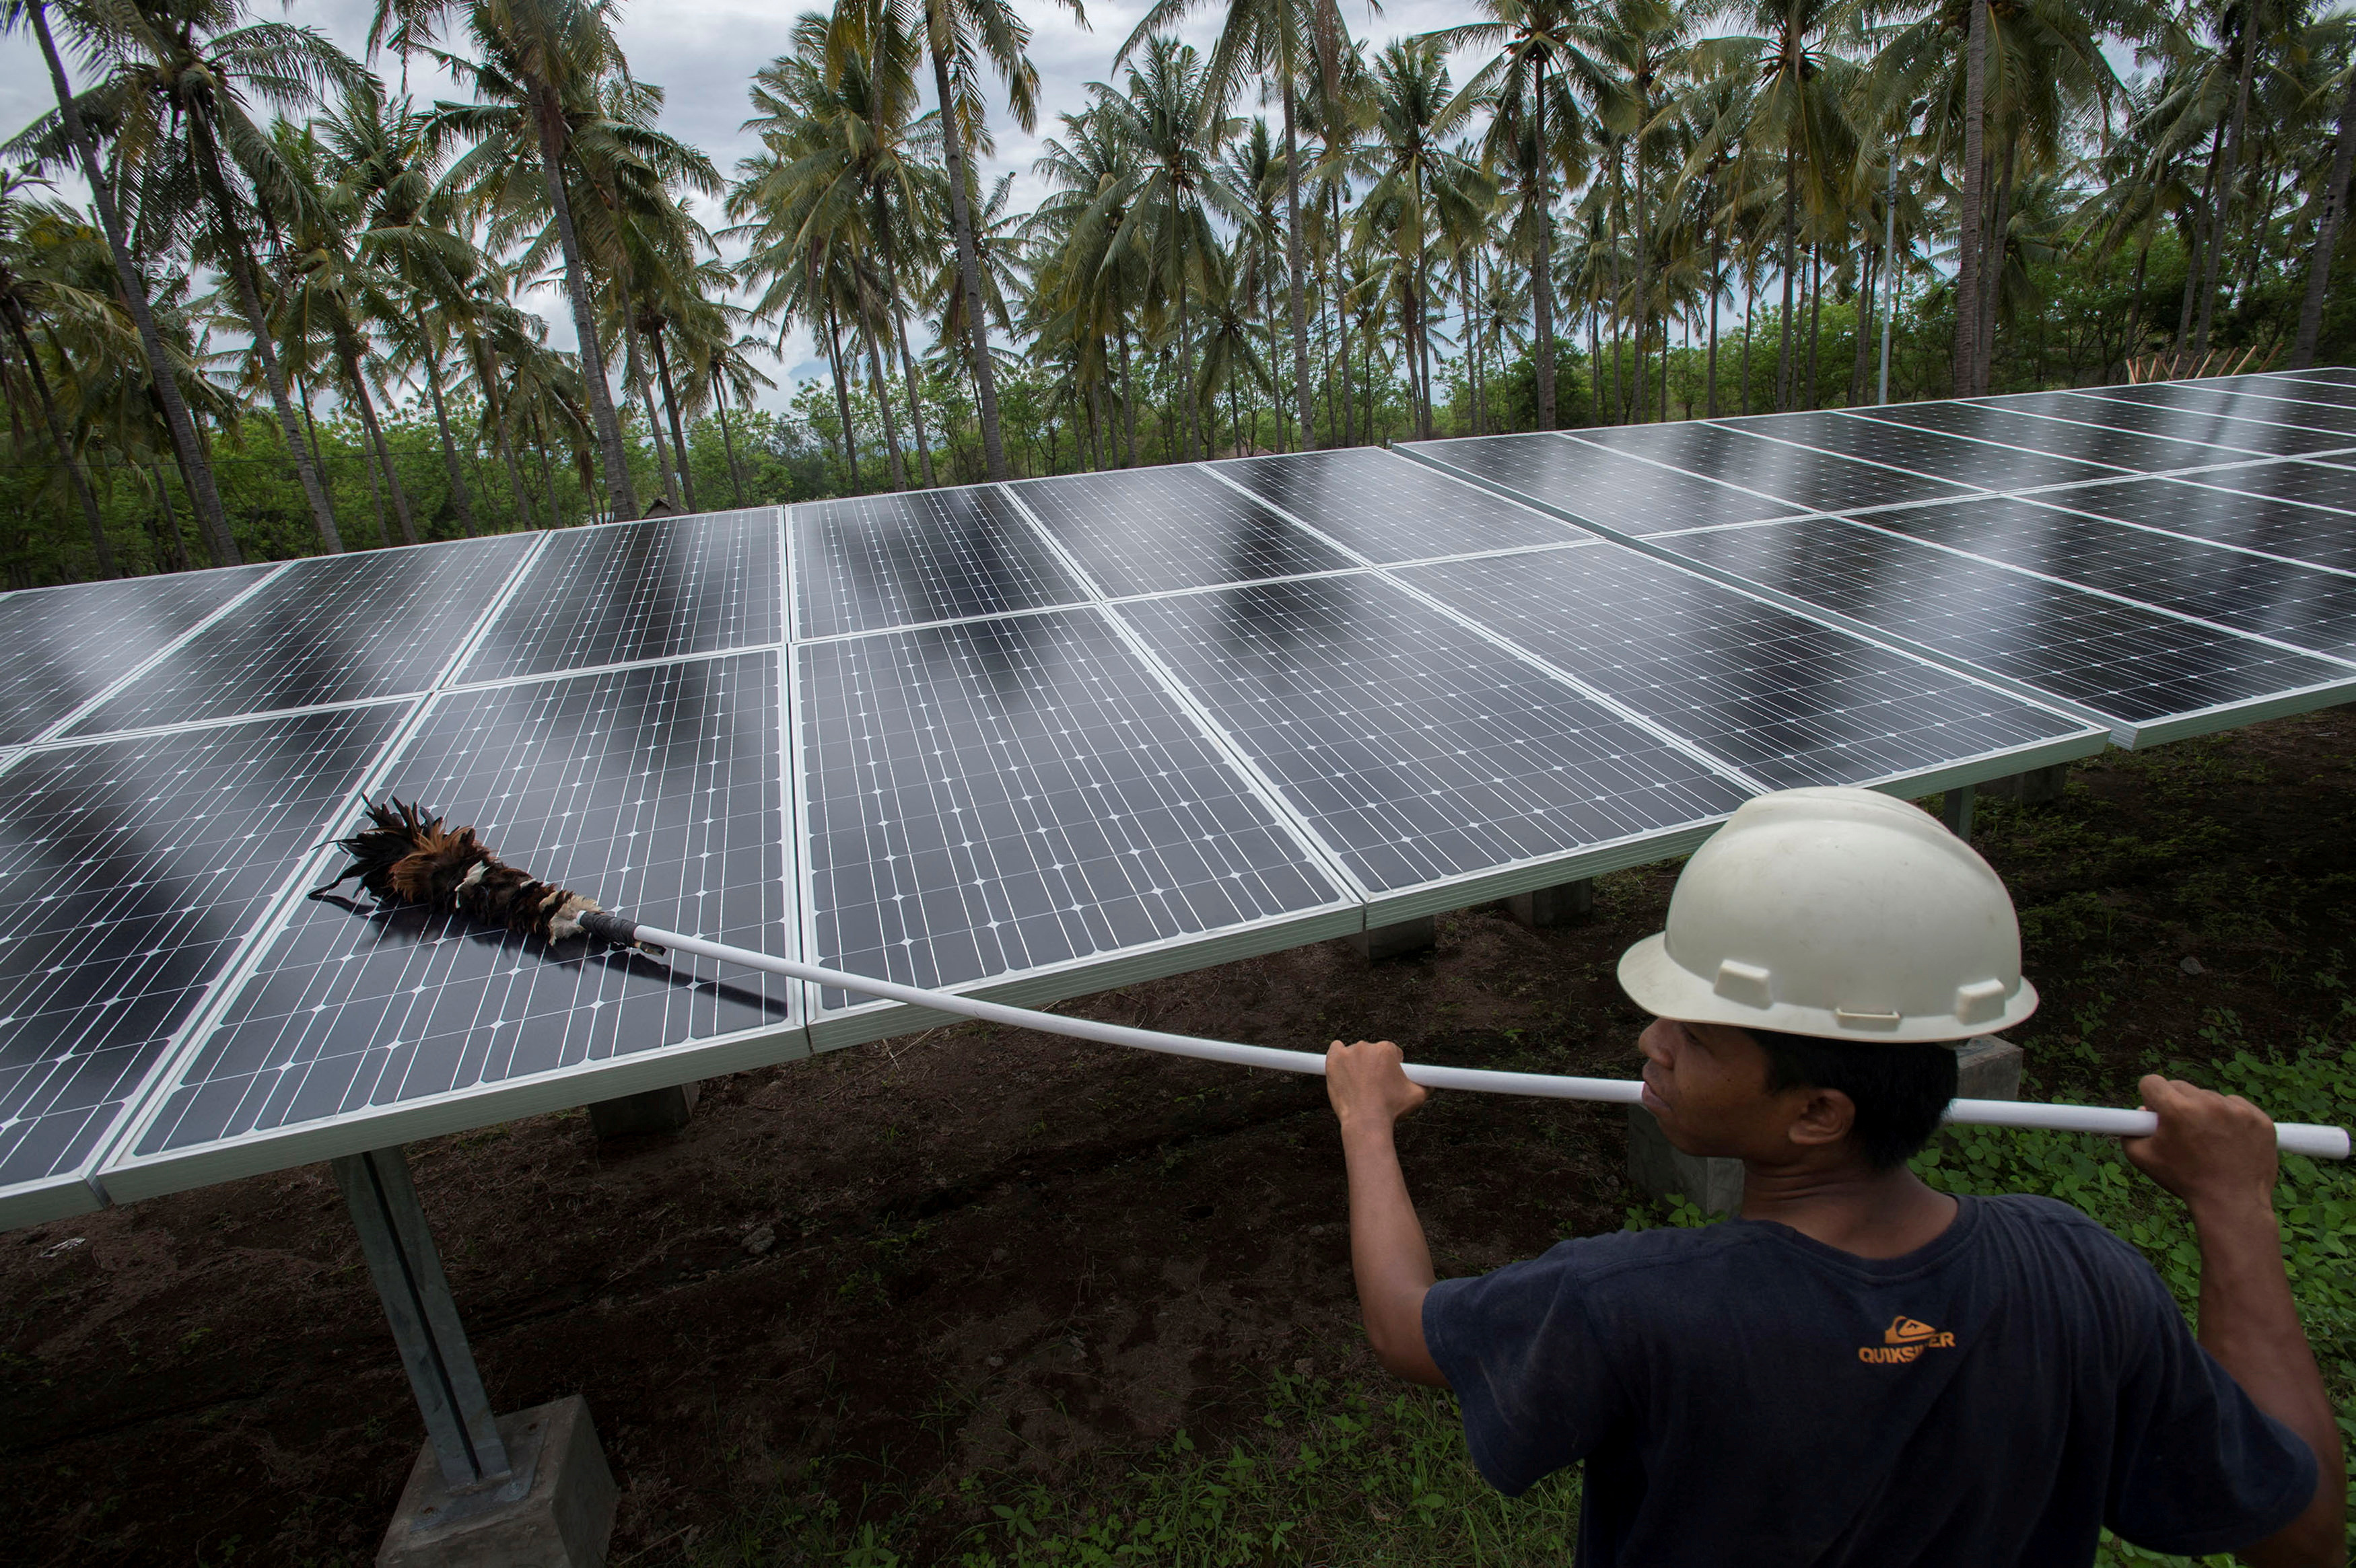 An employee of PT Perusahaan Listrik Negara (PLN) cleans the surface of solar panels at a solar power generation plant in Gili Meno island